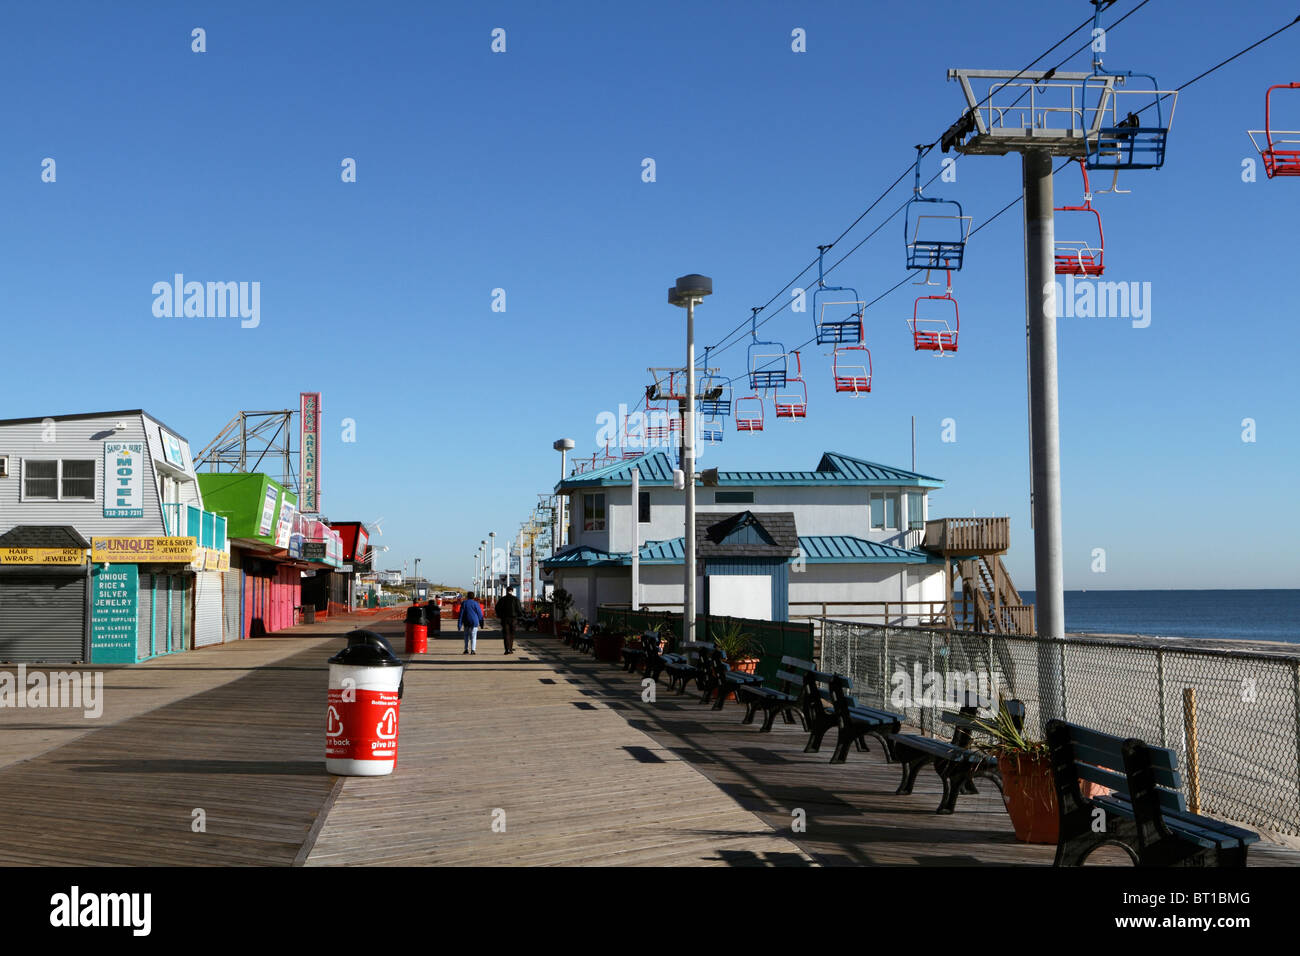 Seaside Heights New Jersey USA boardwalk with chair lift ride on the beach running along side. Seaside Heights, New Jersey, USA. Stock Photo